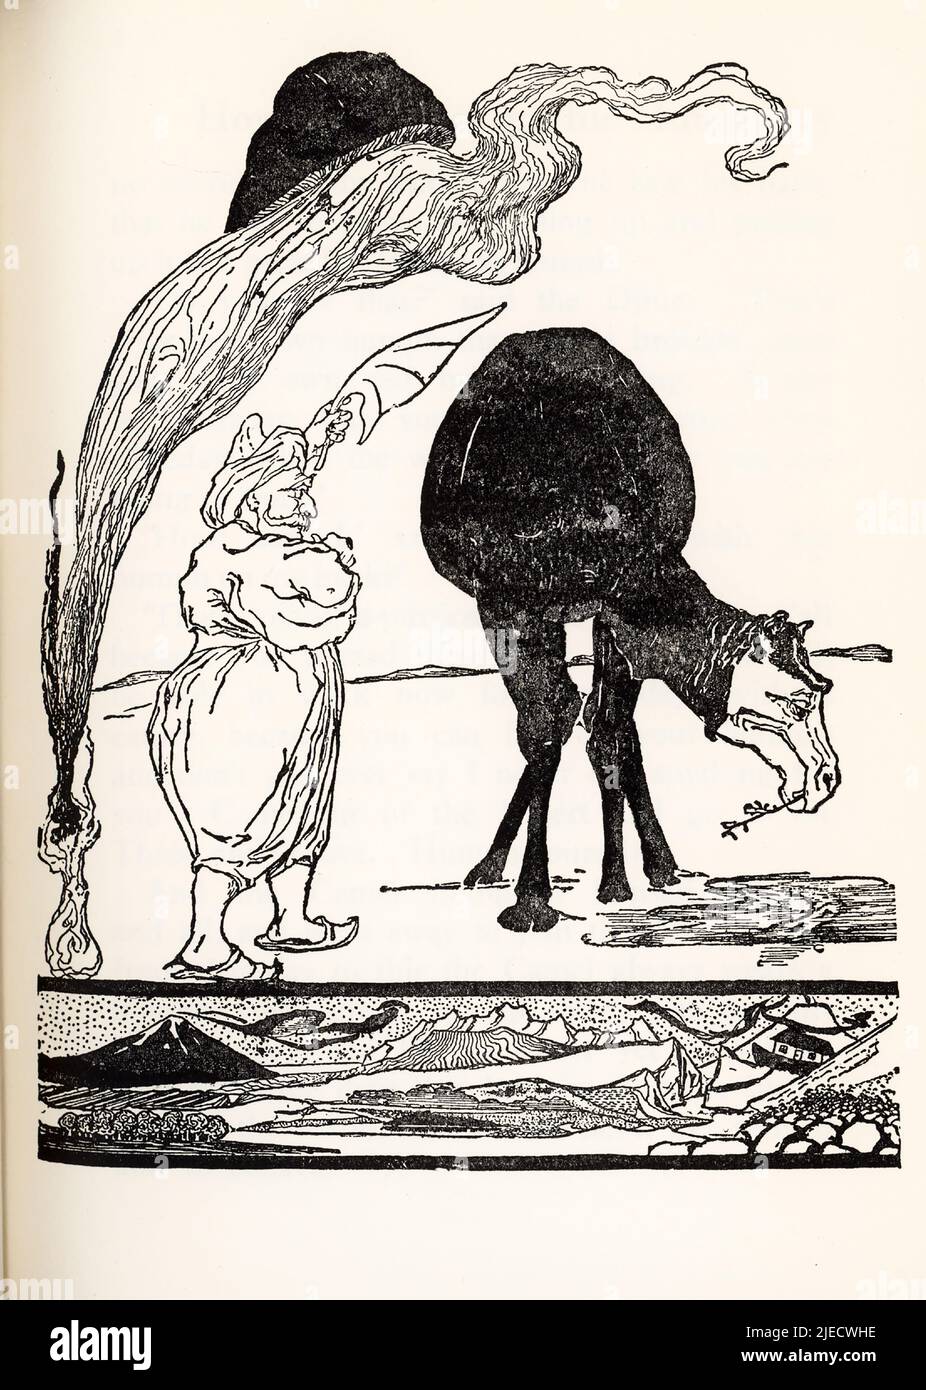 The 1912 caption reads: How Camel got its hump by Kipling - towelly thing is magic and humph on  its shoulder. The illustrarion by J M Gleeson illustrates Kipling’s How the Camel Got Its Lump tale: When the animals began to work for Man, the Camel lived in a desert because he was idle and refused to help. The Dog, the Horse and the Ox all urged him to join in their work, but he only answered “Humph!” They complained to the Man, who said he was sorry, but they would just have to work longer hours themselves. Then they complained to the Djinn in charge of All Deserts. So the Djinn went to see th Stock Photo